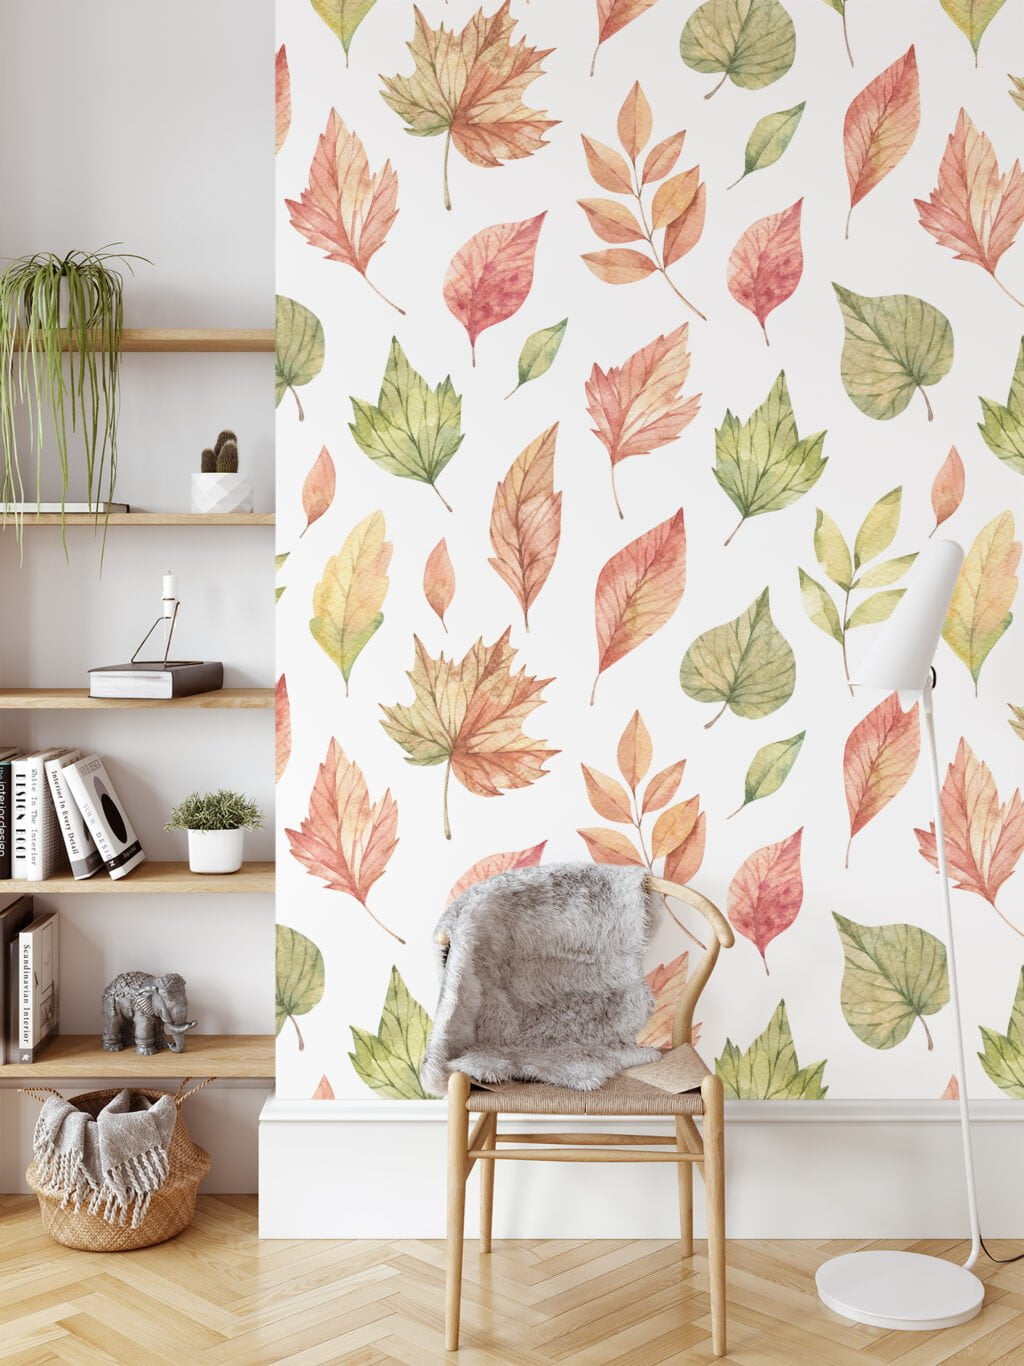 Watercolor Fall Themed Leaves Illustration Wallpaper, Autumn Nature Design Peel & Stick Wall Mural